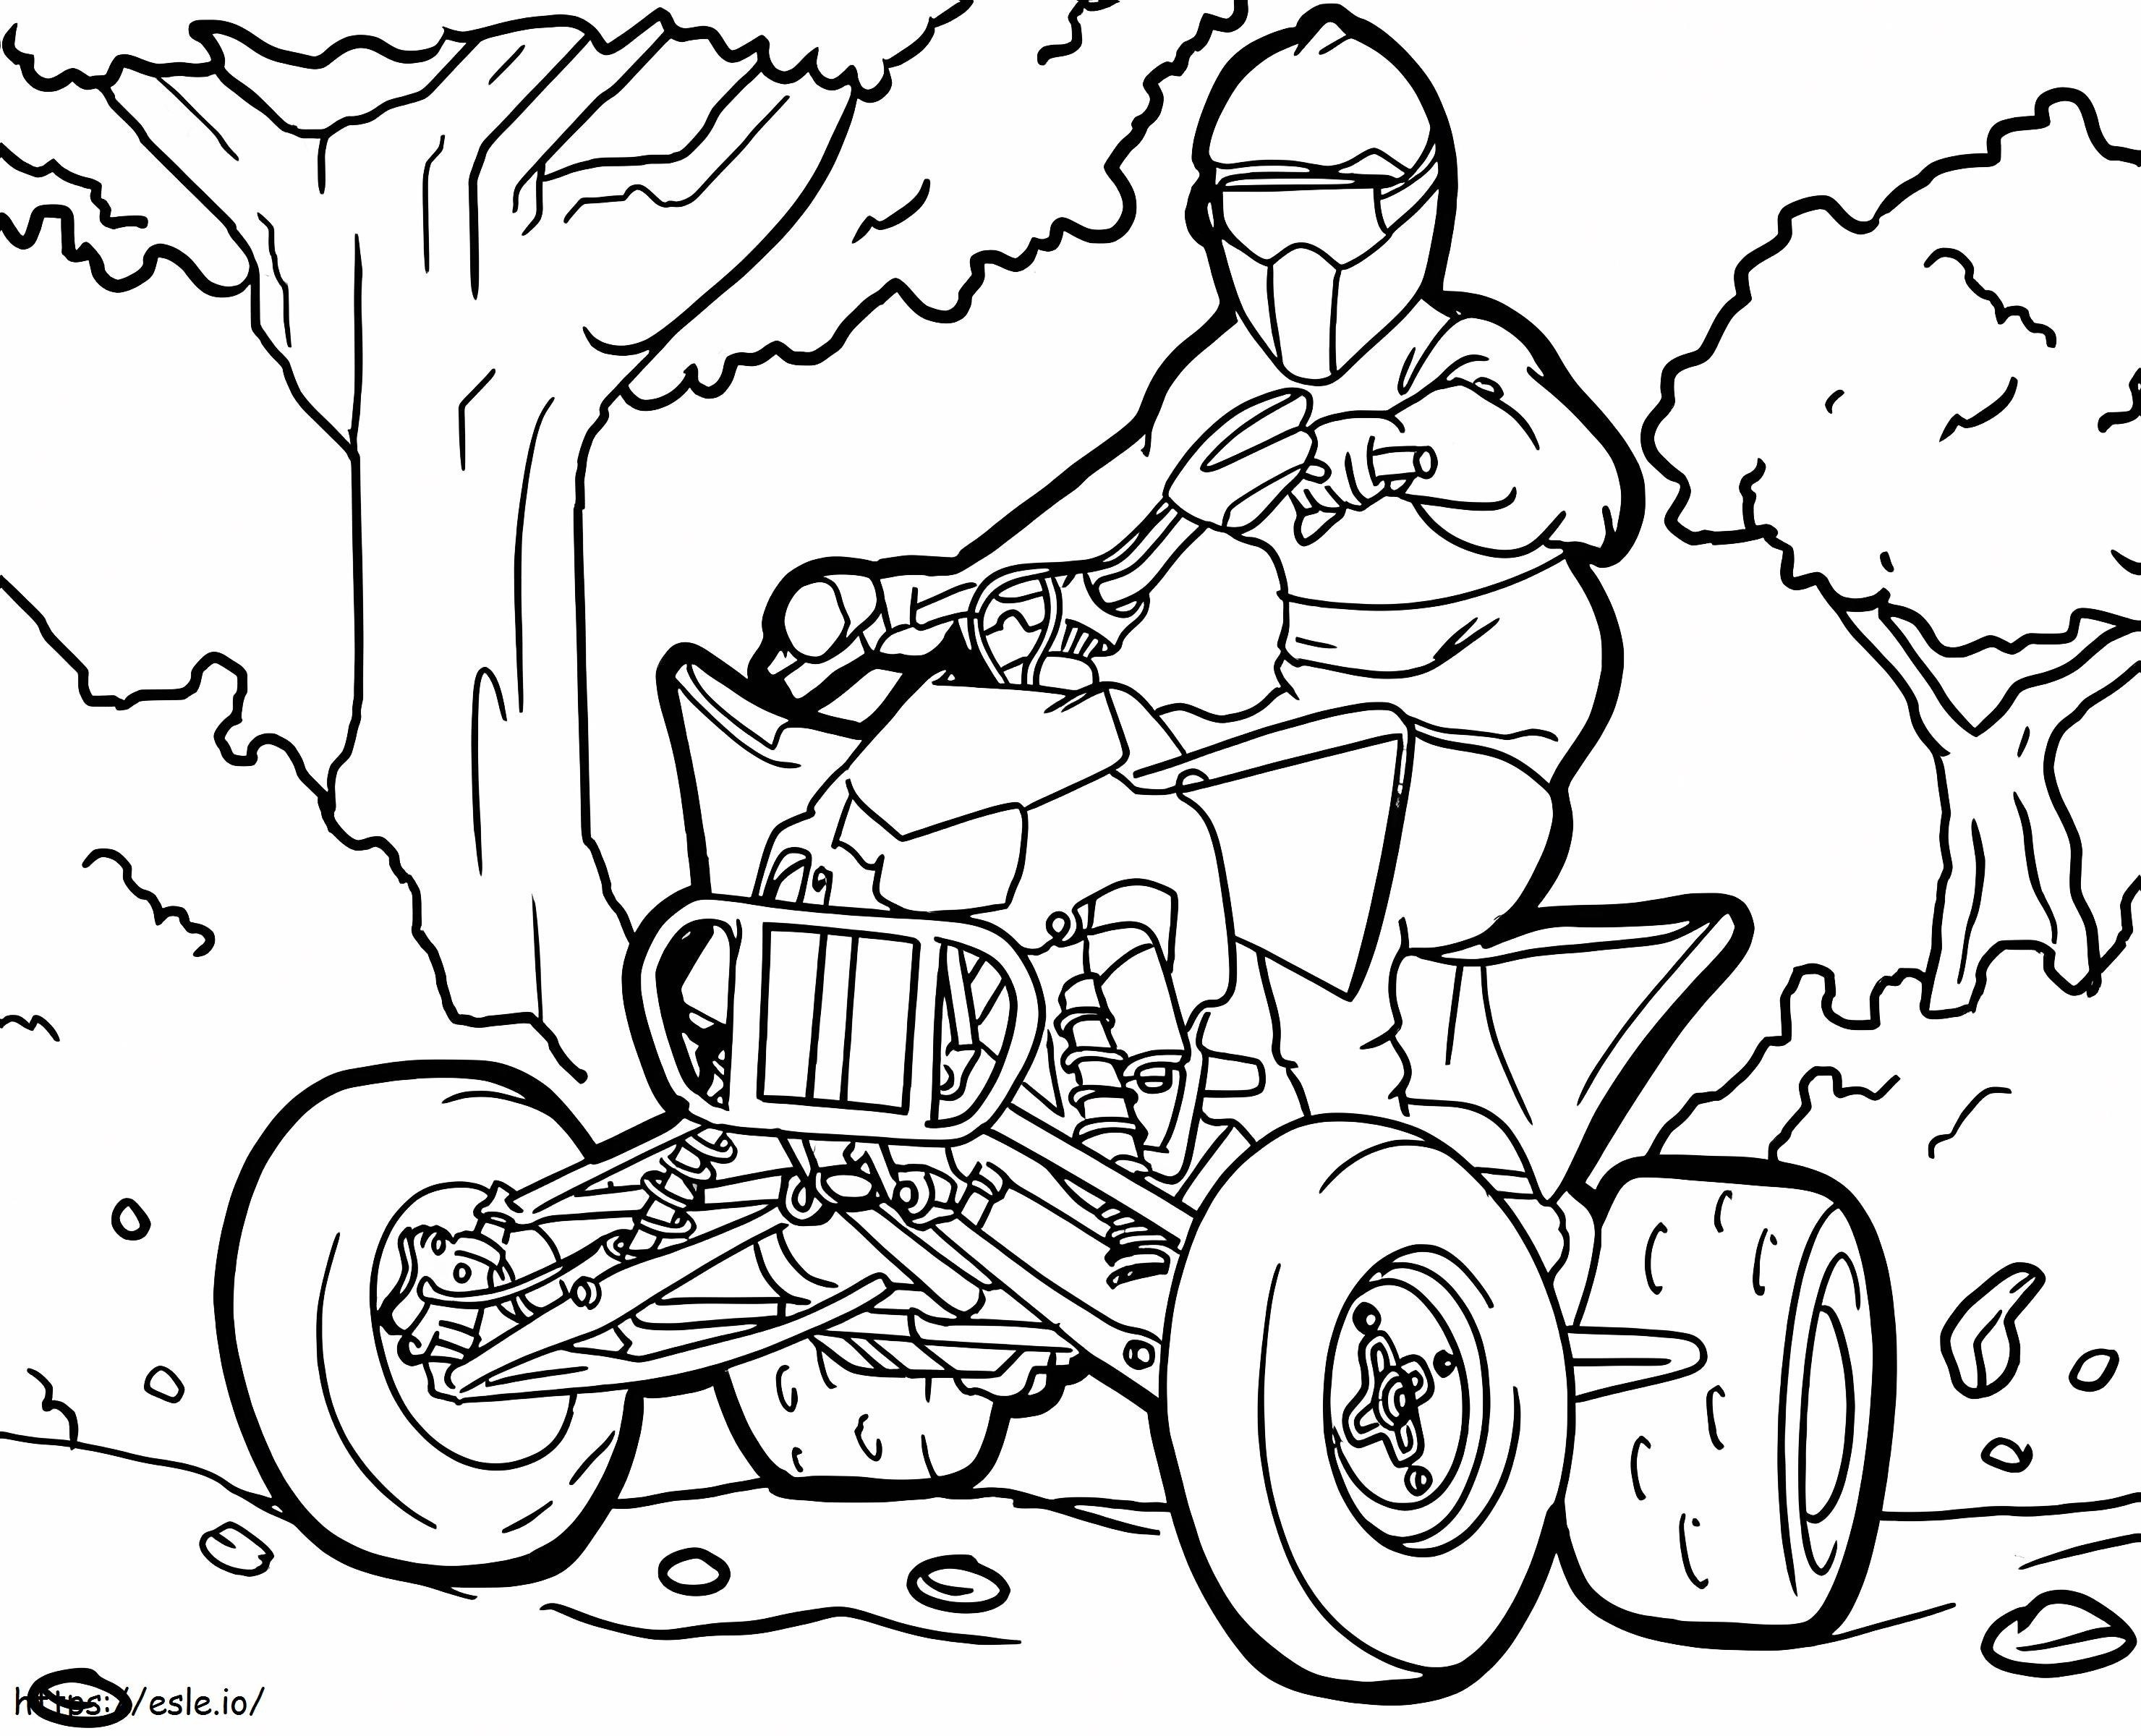 Driving ATV coloring page